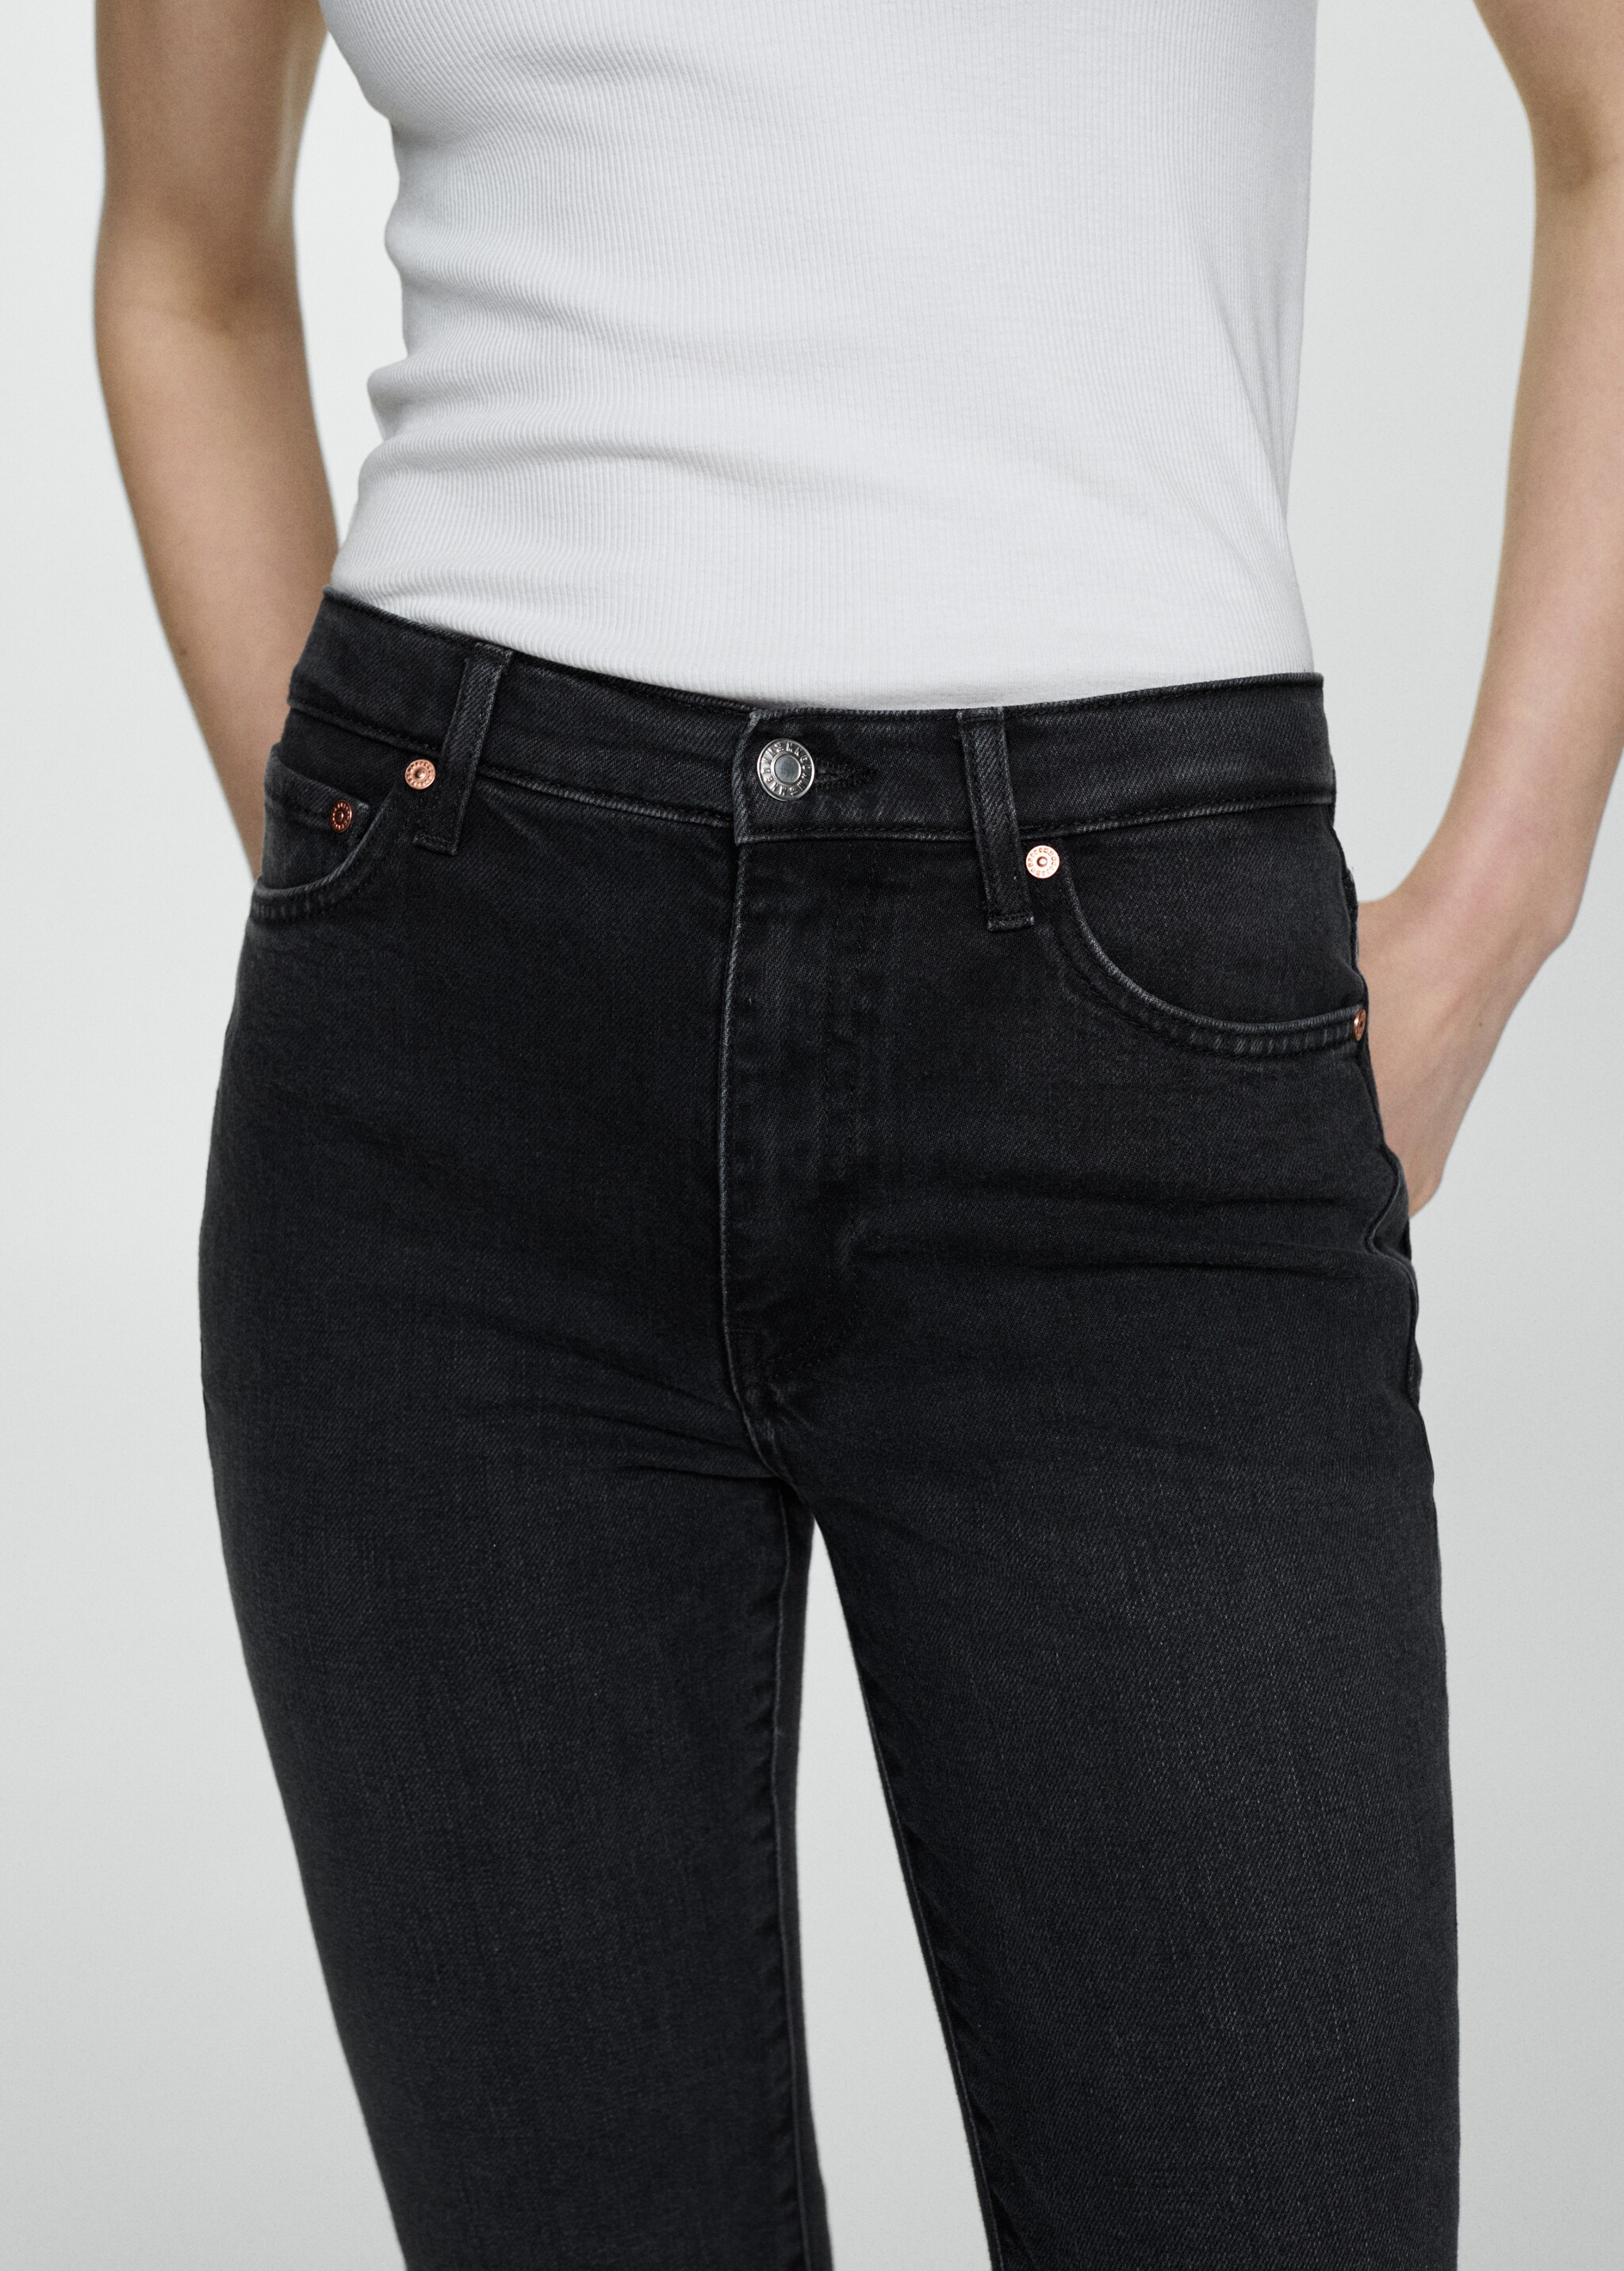 Slim cropped jeans - Details of the article 6